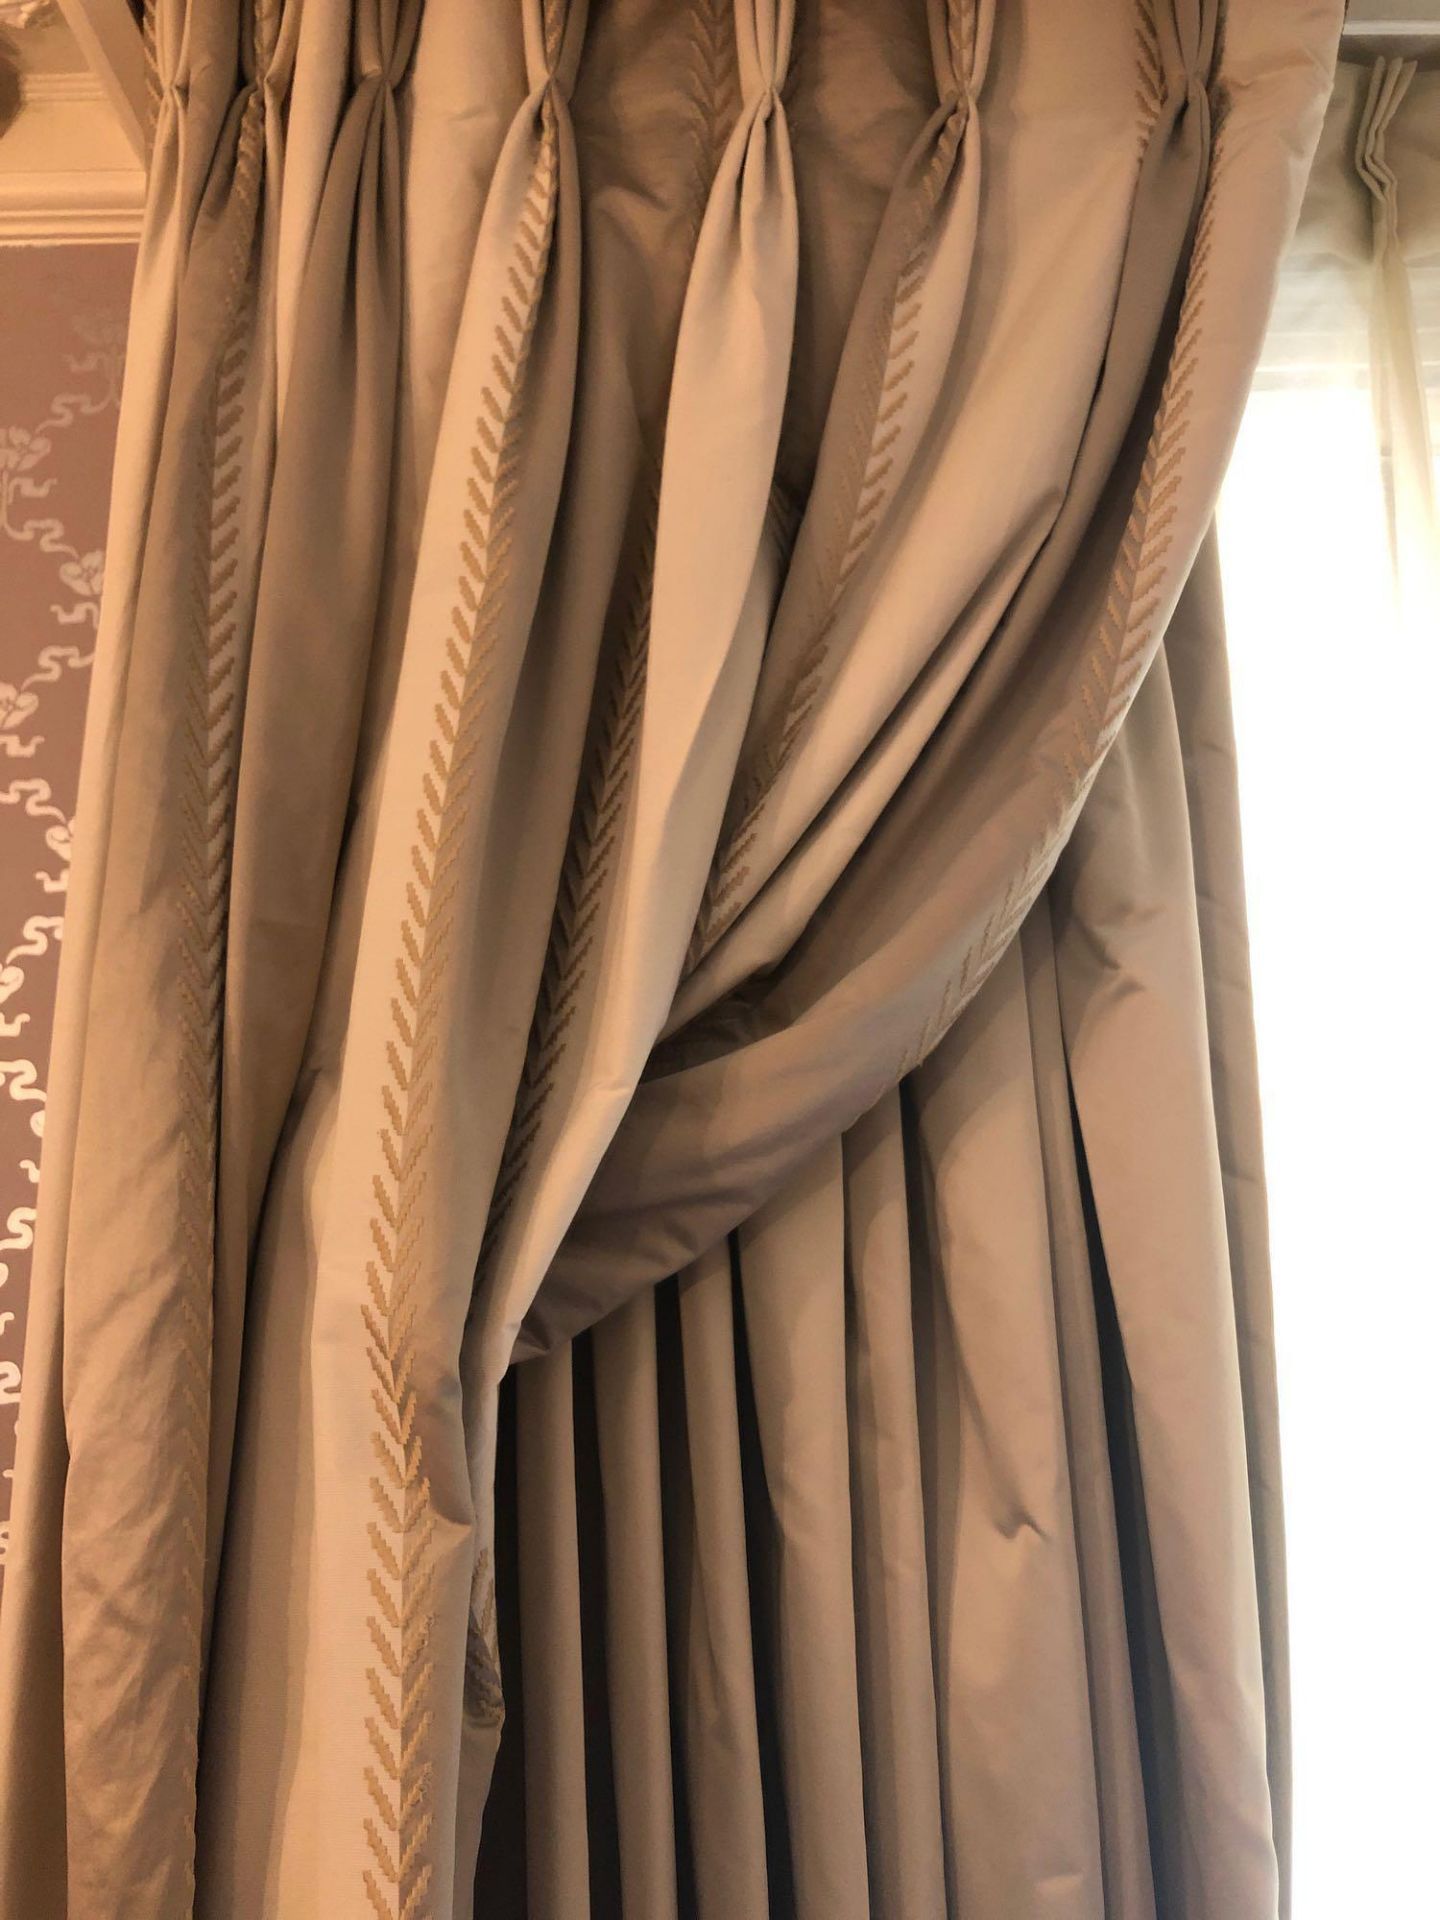 A Pair Of Silk Drapes And Jabots In Gold And Brown 260 x 225cm (Room 515)